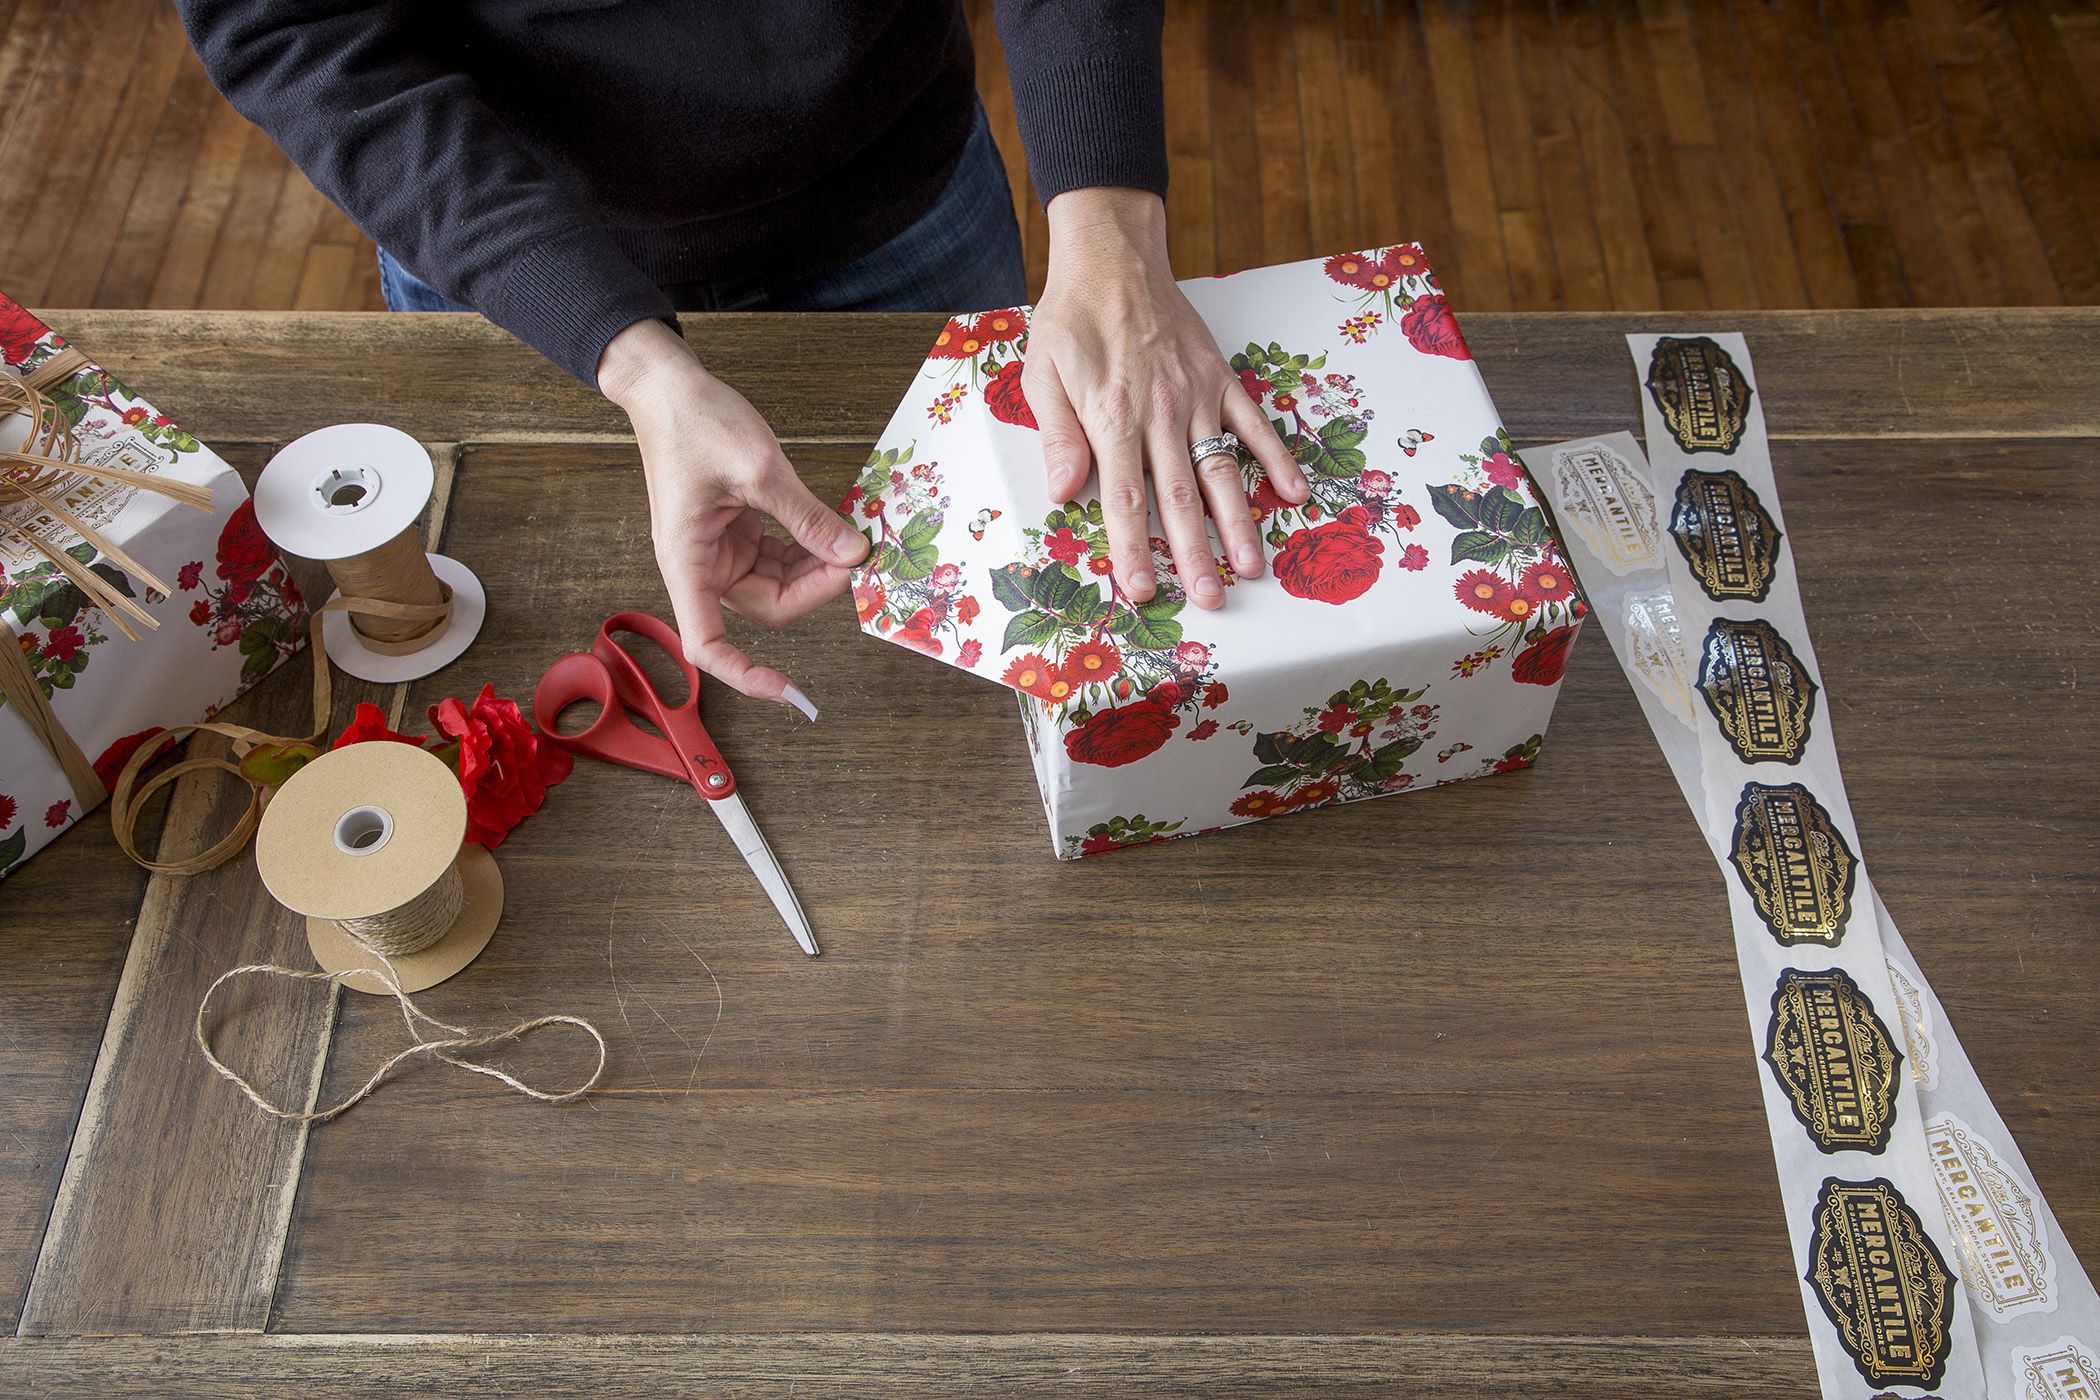 How to Wrap a Gift Like a Pro